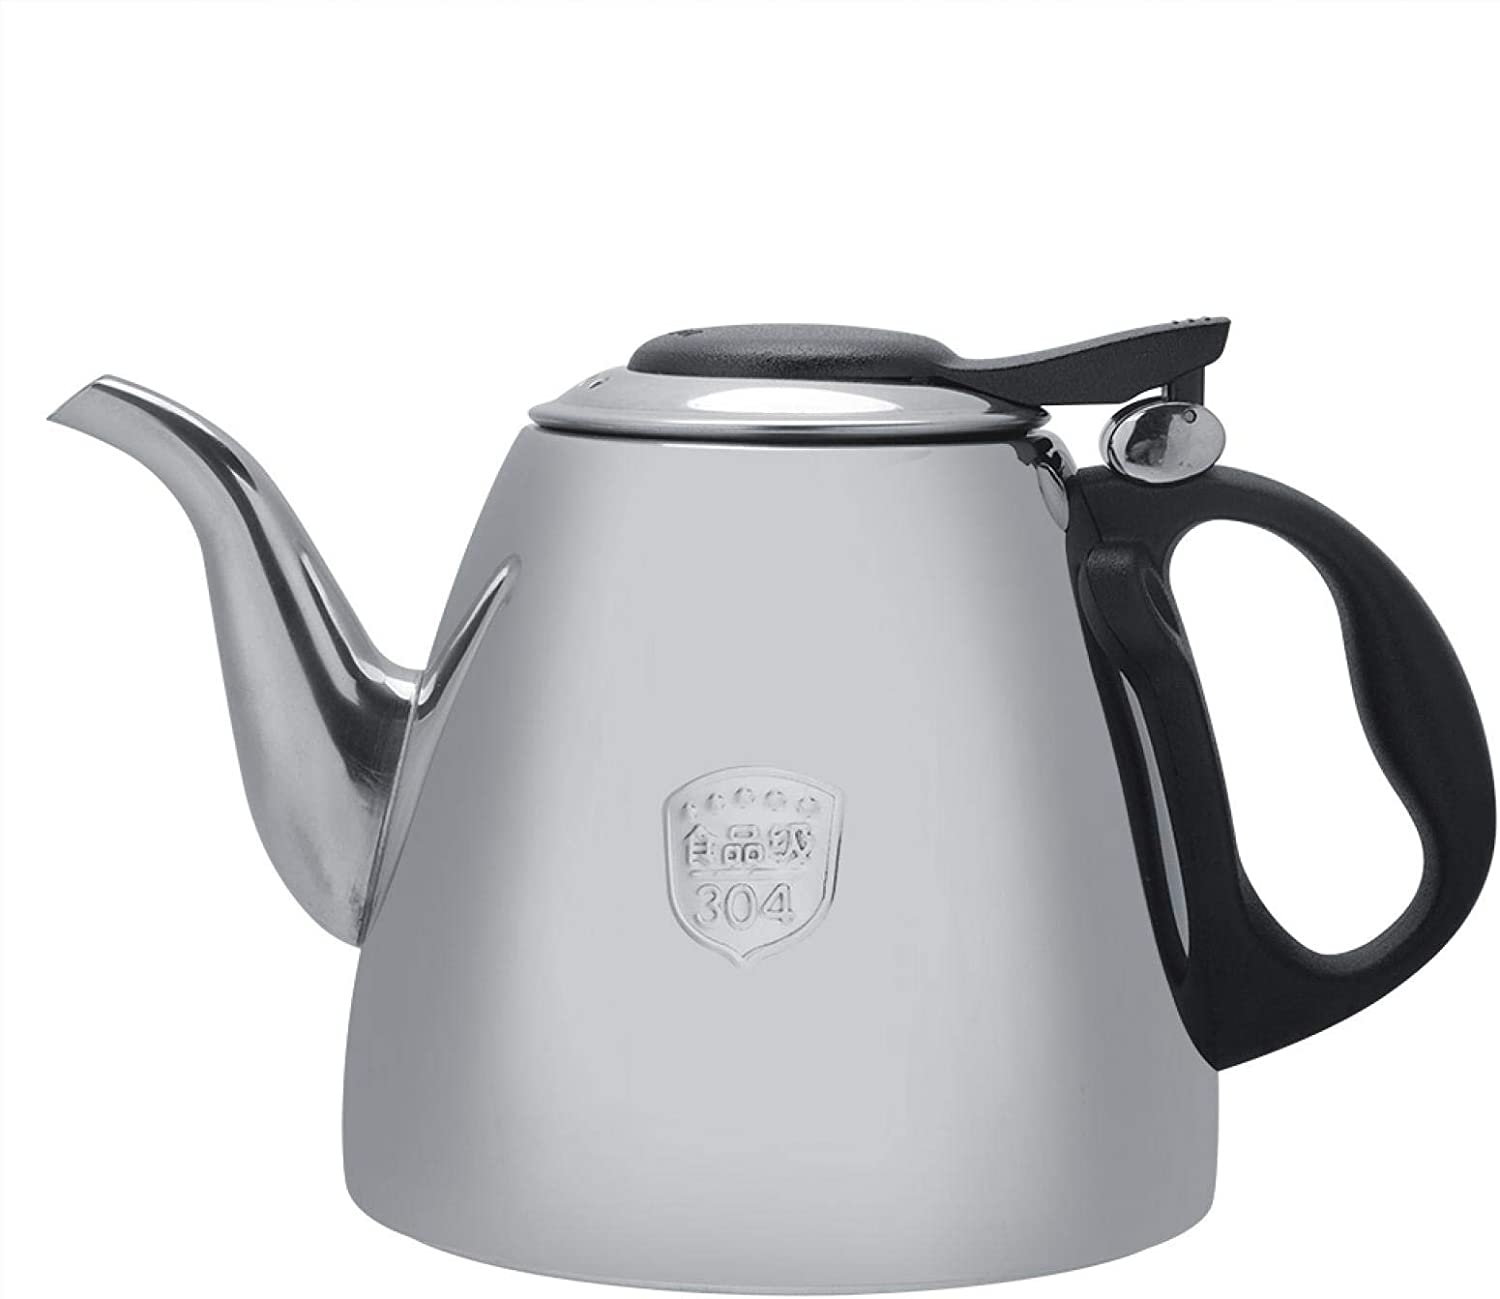 Zerodis Stainless Steel Tea Kettle Large Capacity Fast Heating Stove Coffee Kettle with Heat-Resistant Handle for Home Office Café (1.2 L)